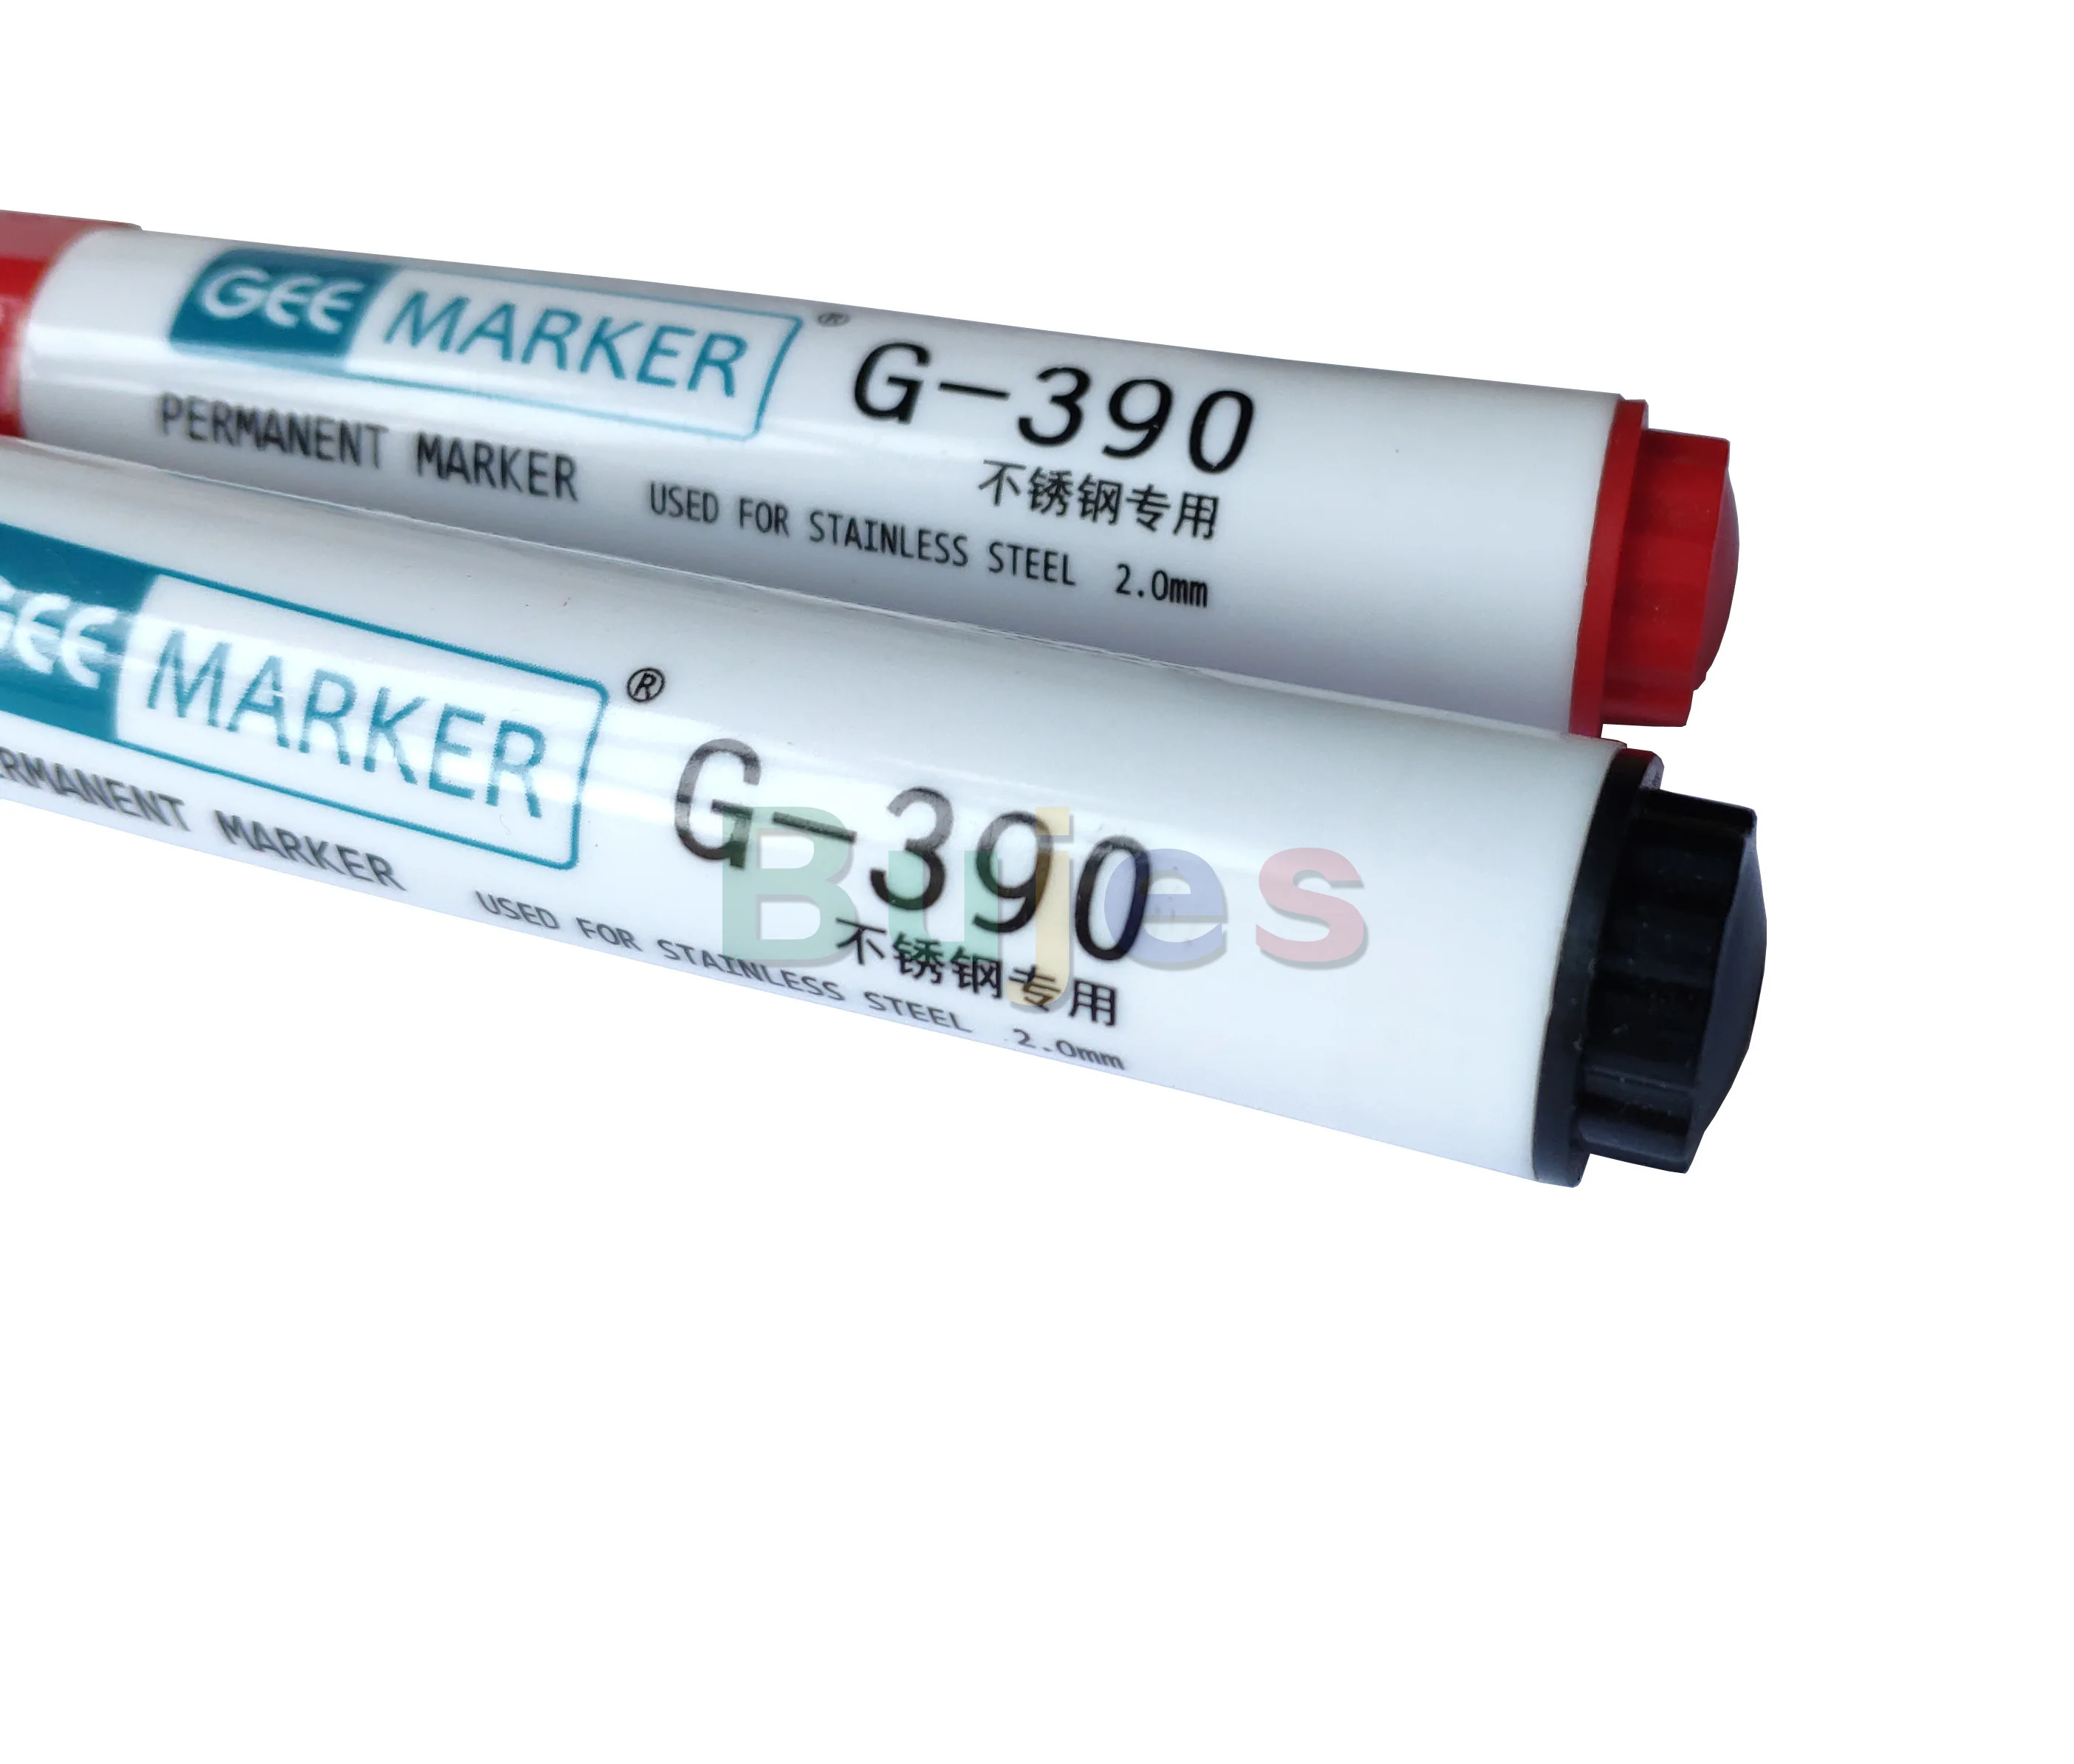 Geemarker G-390 Special Marking Pen For Metal Stainless Steel Mark Pen For  Industrial Marking And Environmental Protection - Paint Markers - AliExpress